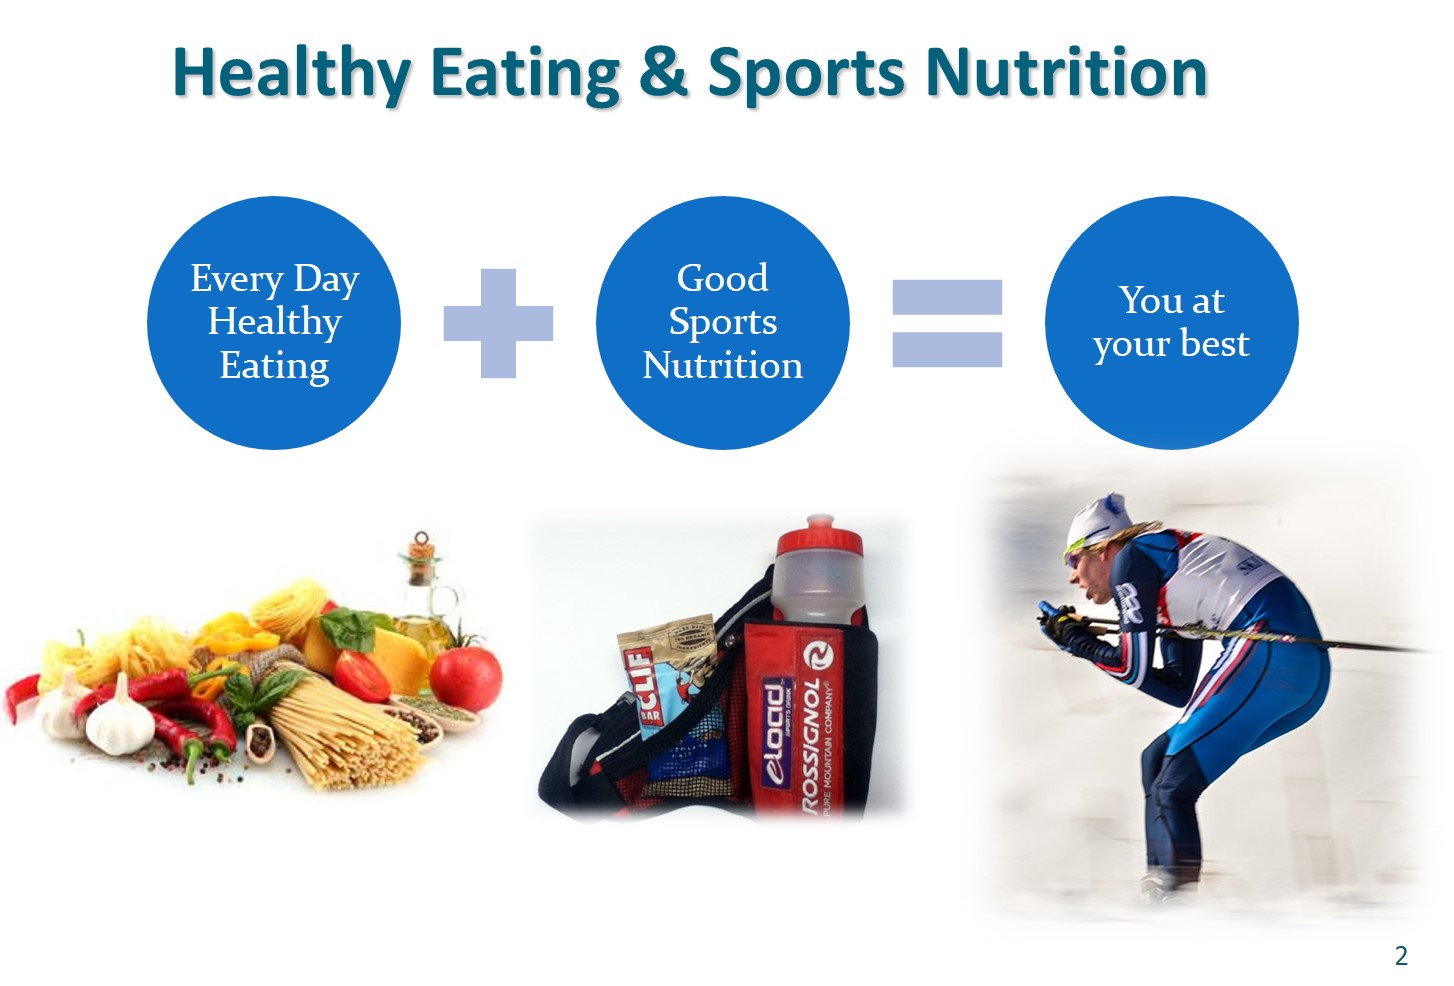 Nutrition strategies for health